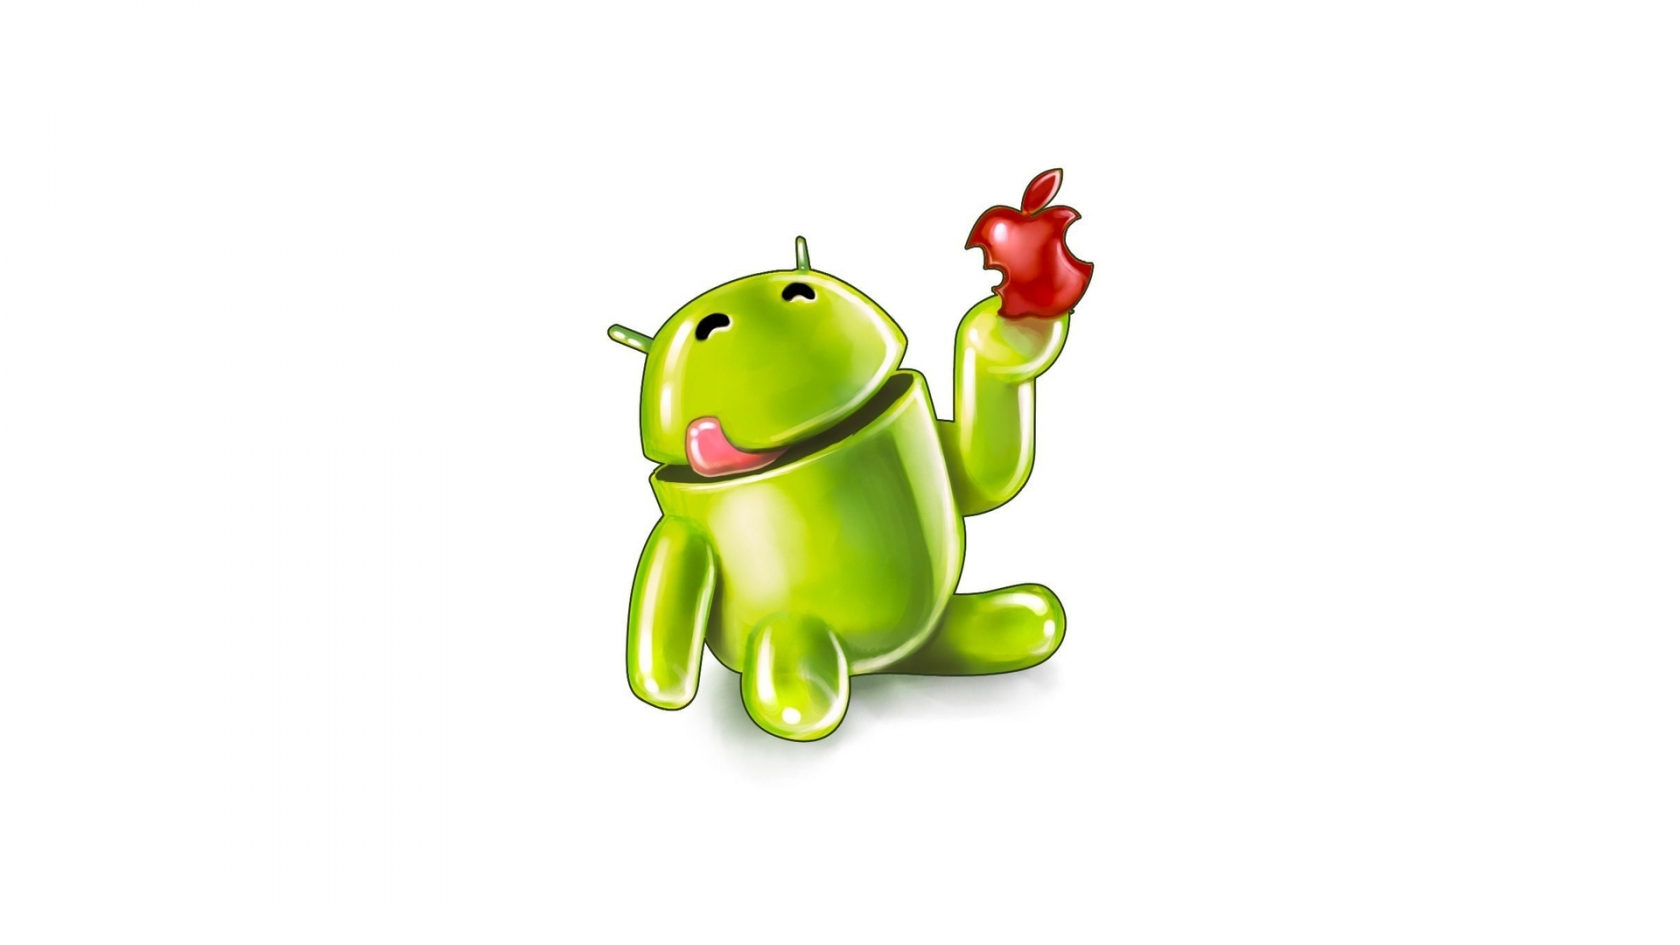 Android Eating Apple for 1680 x 945 HDTV resolution